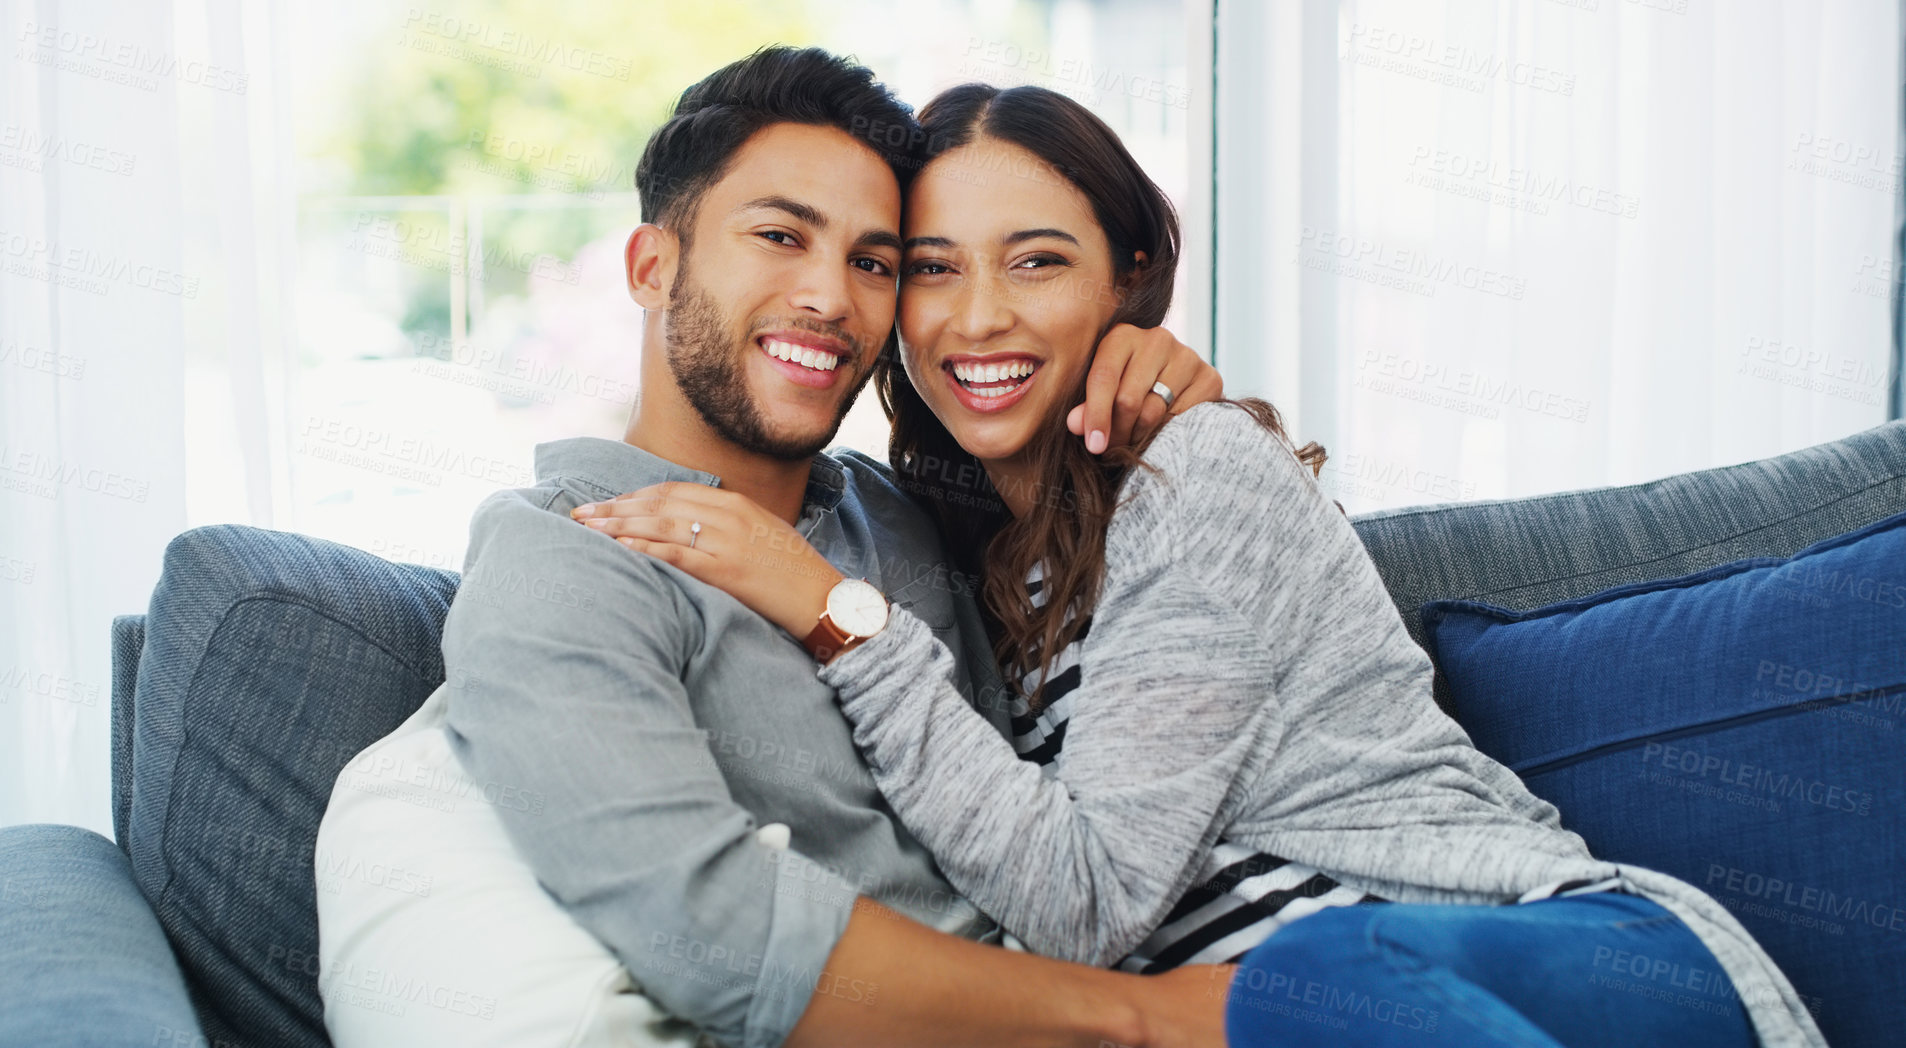 Buy stock photo Cropped portrait of an affectionate young couple holding each other while in their living room during the day